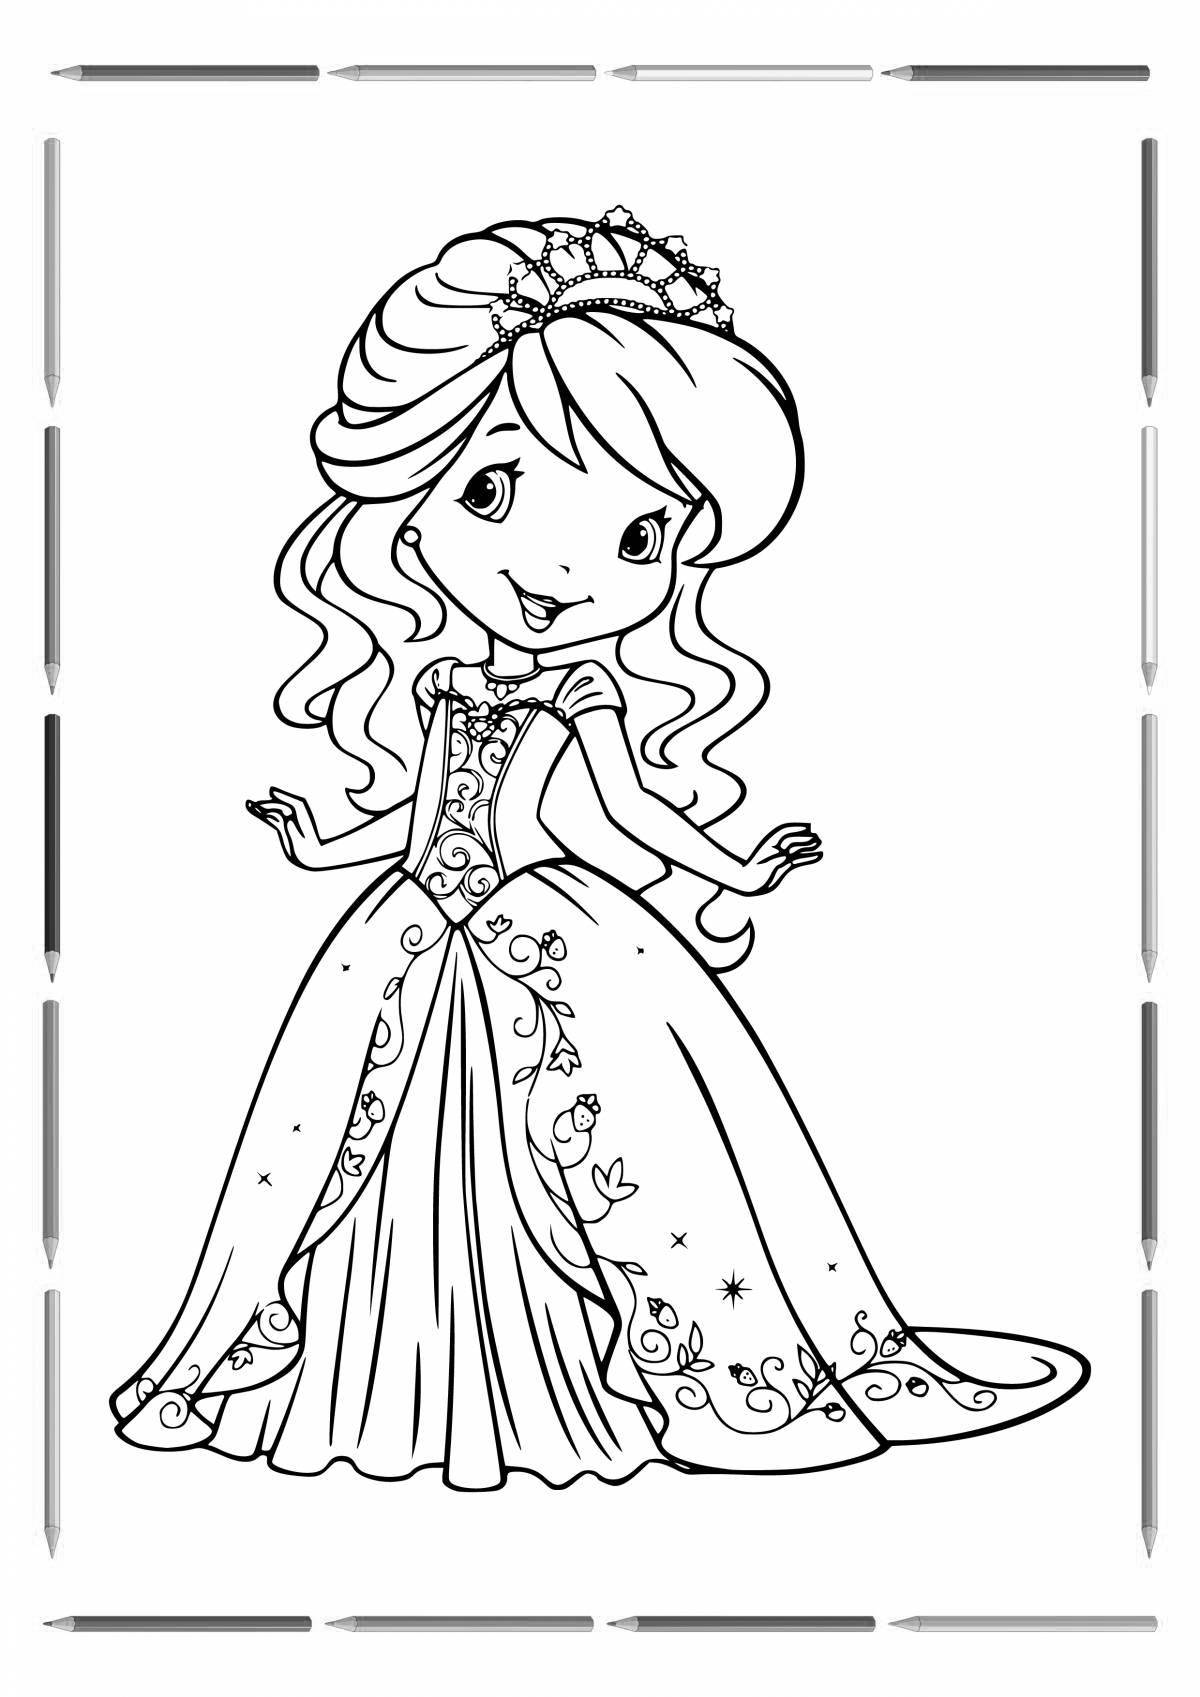 Joyful coloring for children 3-4 years old for girls princess